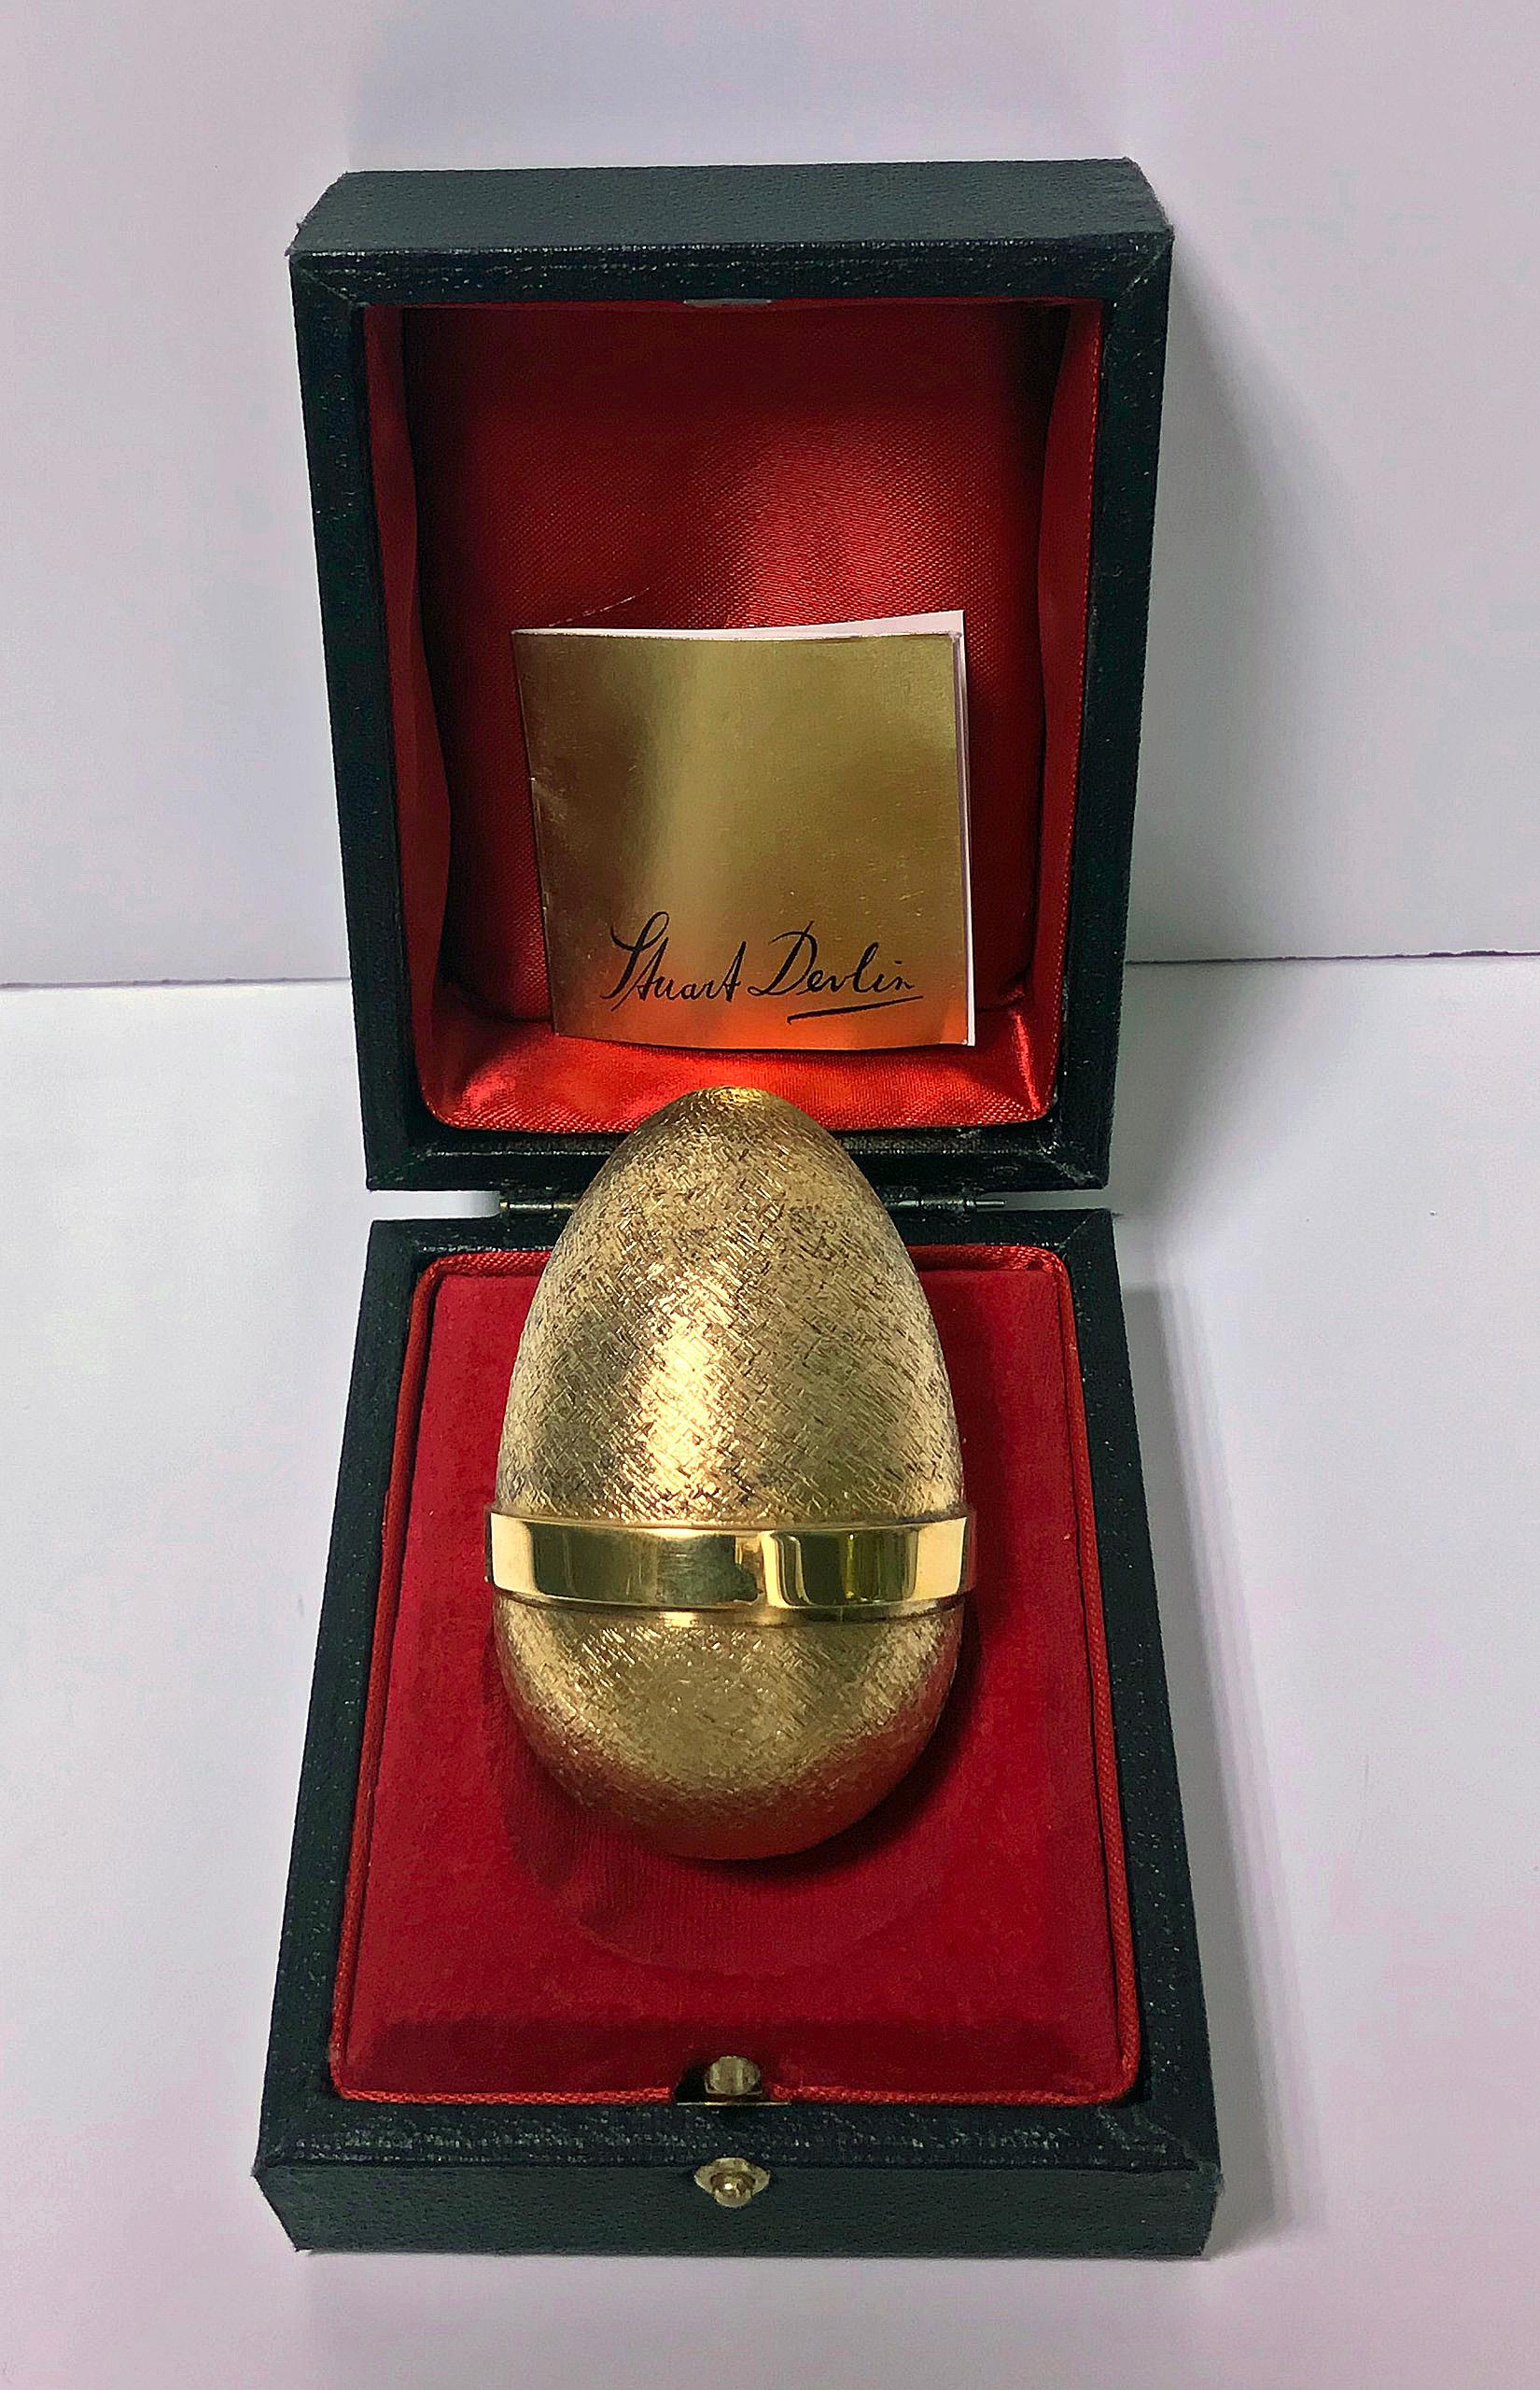 Stuart Devlin Silver Gilt Surprise Egg, London 1980, opening to reveal a a clown and performing dog. Original box and papers. Height: 7.5cm high, No 19 of limited edition of 100. Item Weight: 131 grams.